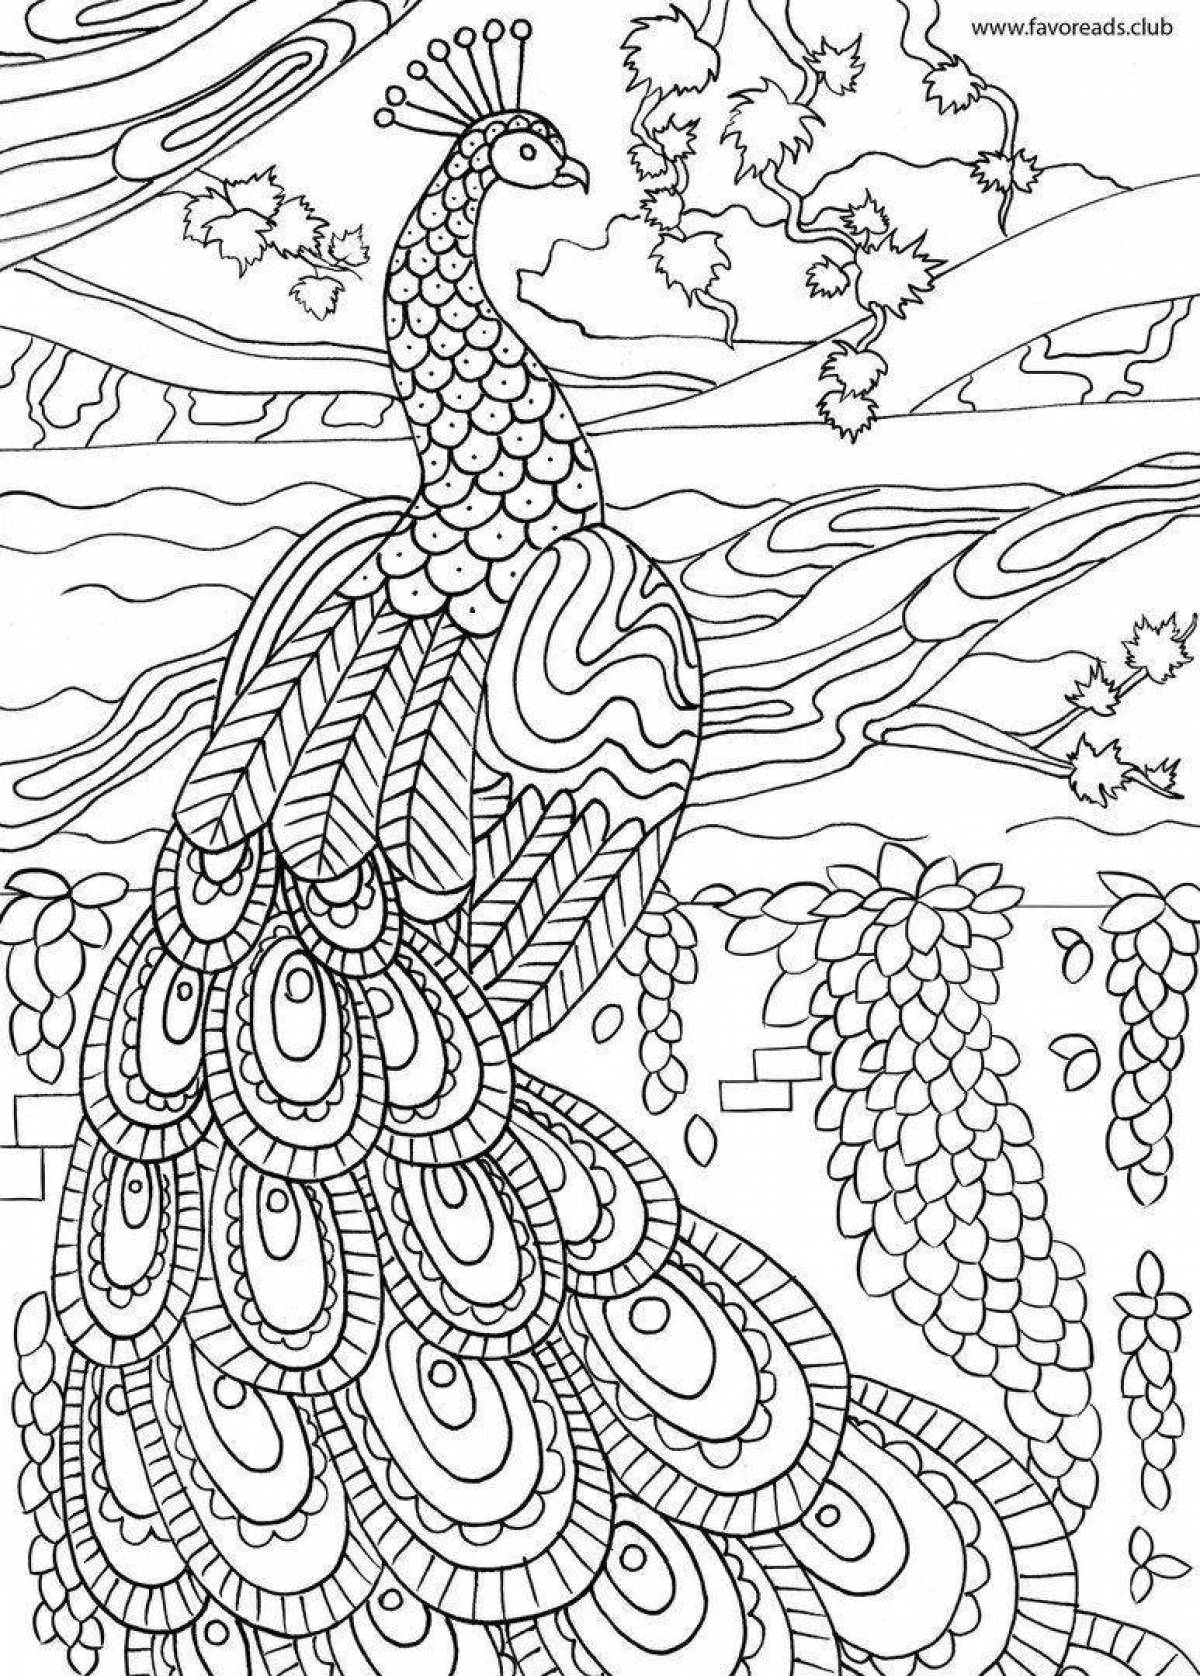 Delightful coloring by numbers for adults ru antistress